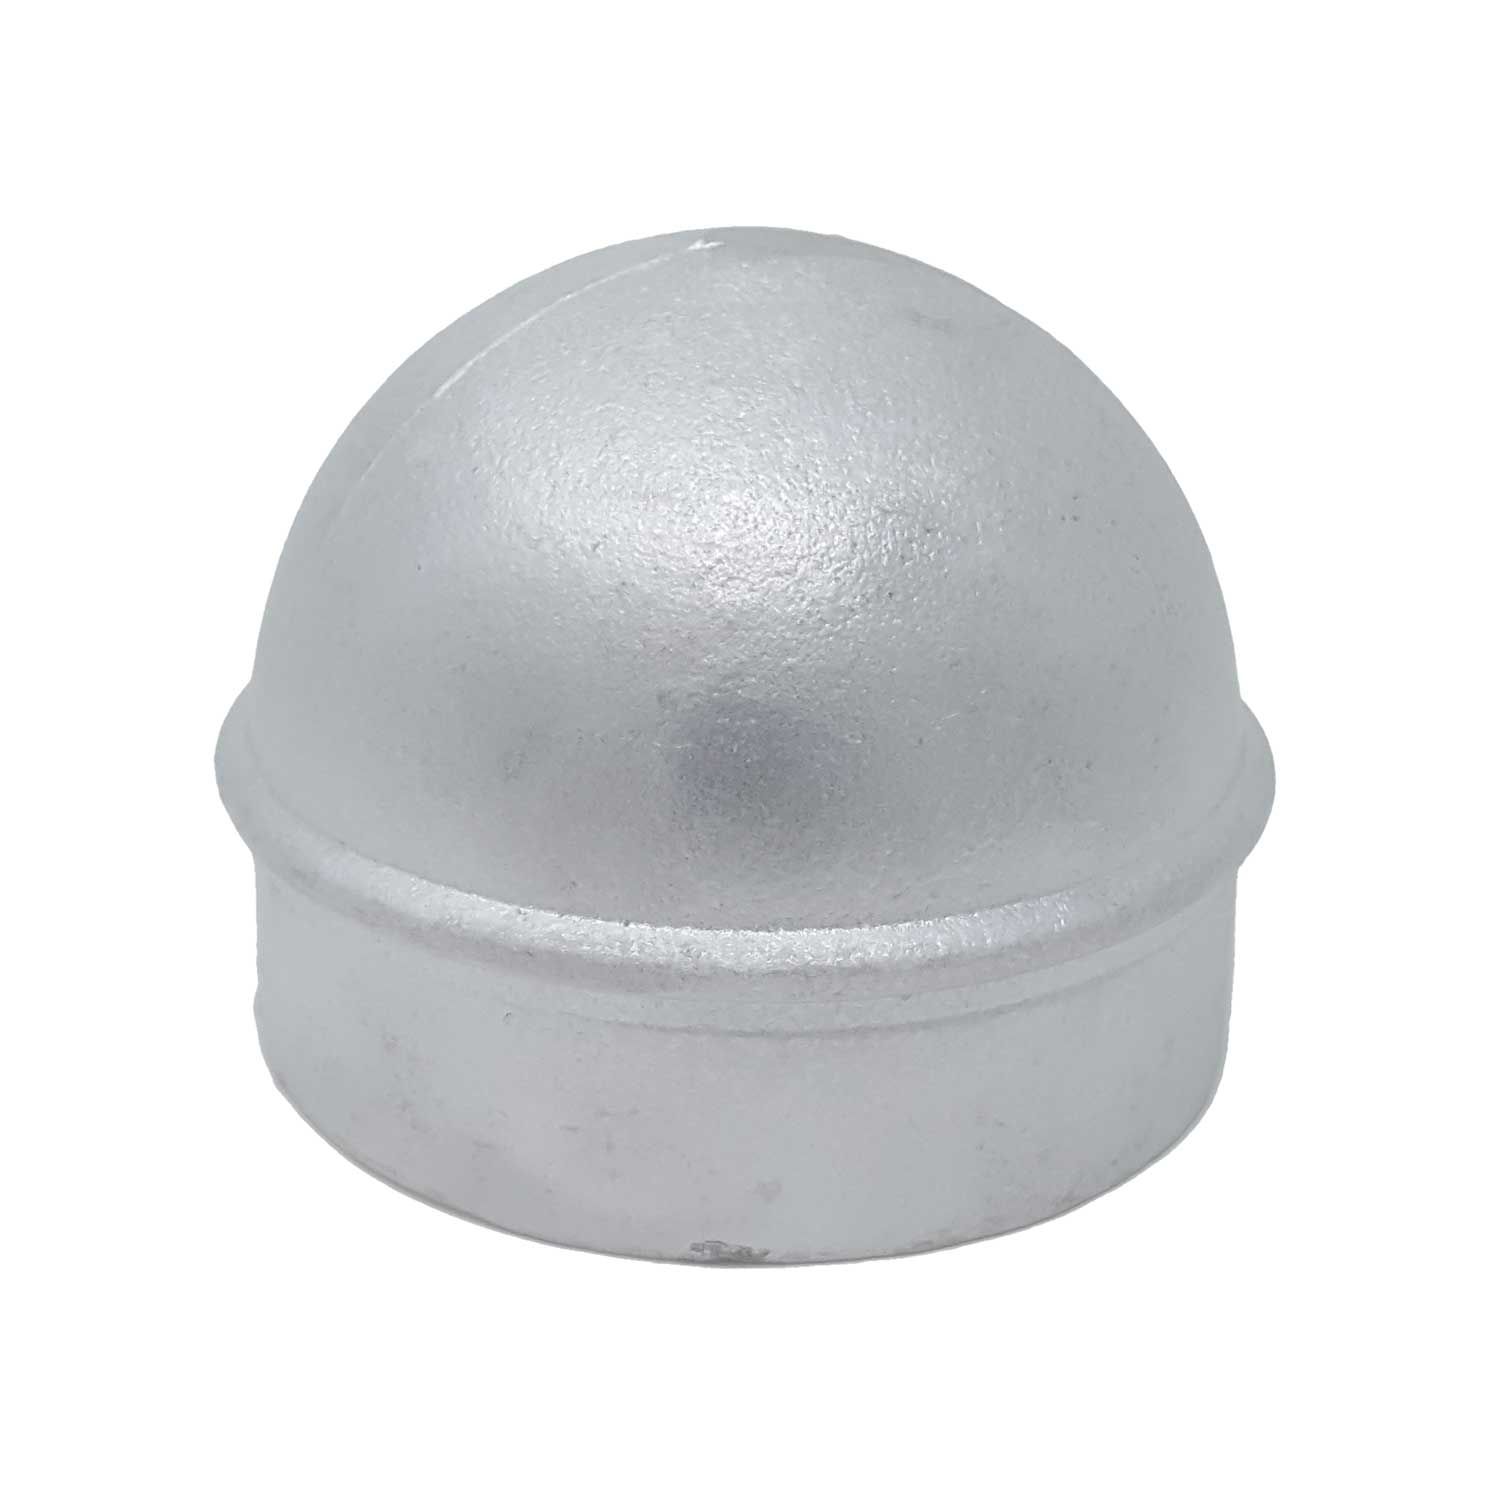 Chain Link Fence Post Dome Caps 6pc 3" Brand New Die Cast Aluminum 